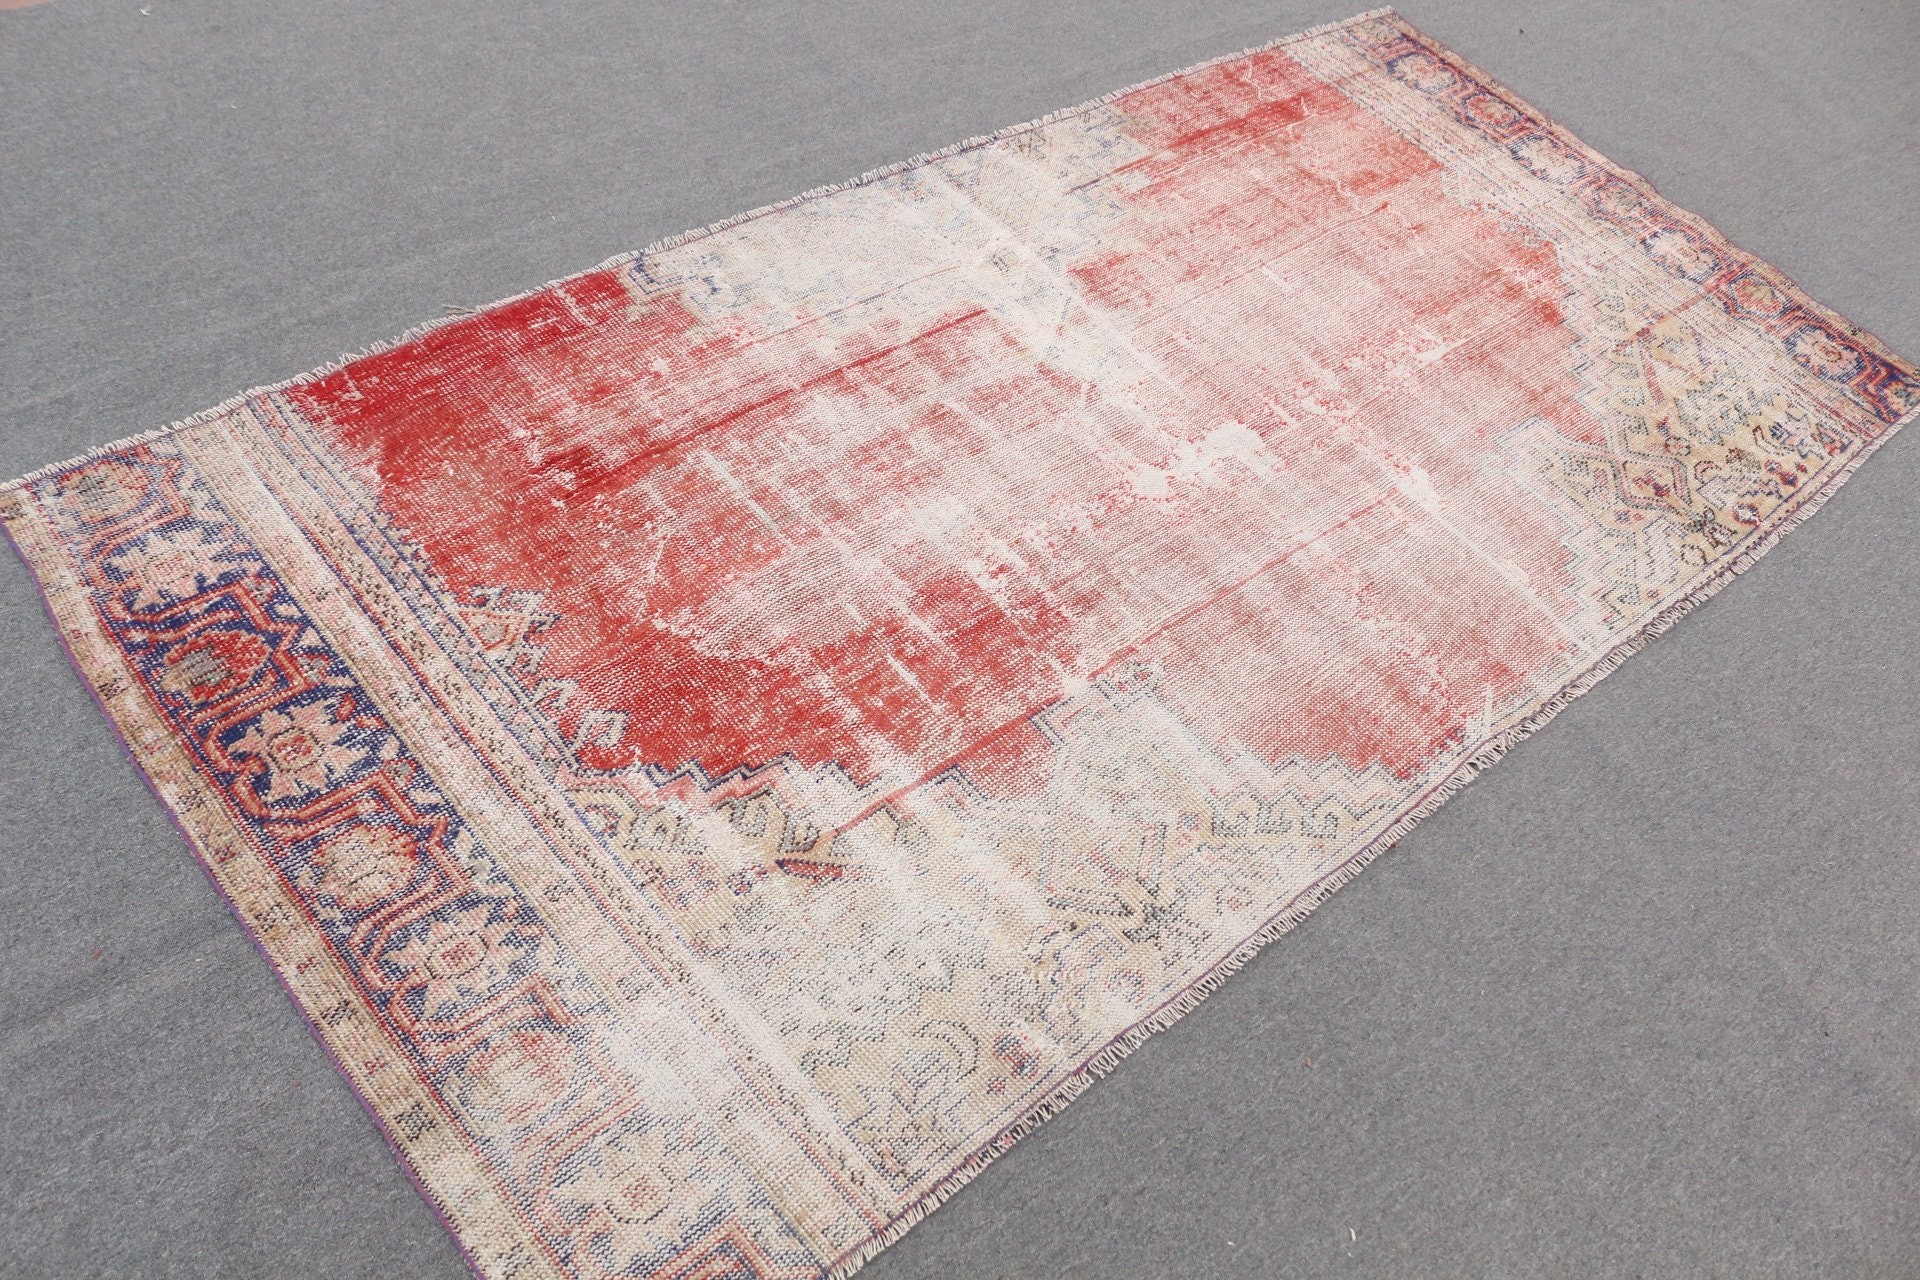 9.9x4.8 ft Large Rug, Moroccan Rug, Turkish Rug, Bedroom Rug, Rugs for Salon, Salon Rug, Red Kitchen Rugs, Anatolian Rugs, Vintage Rugs